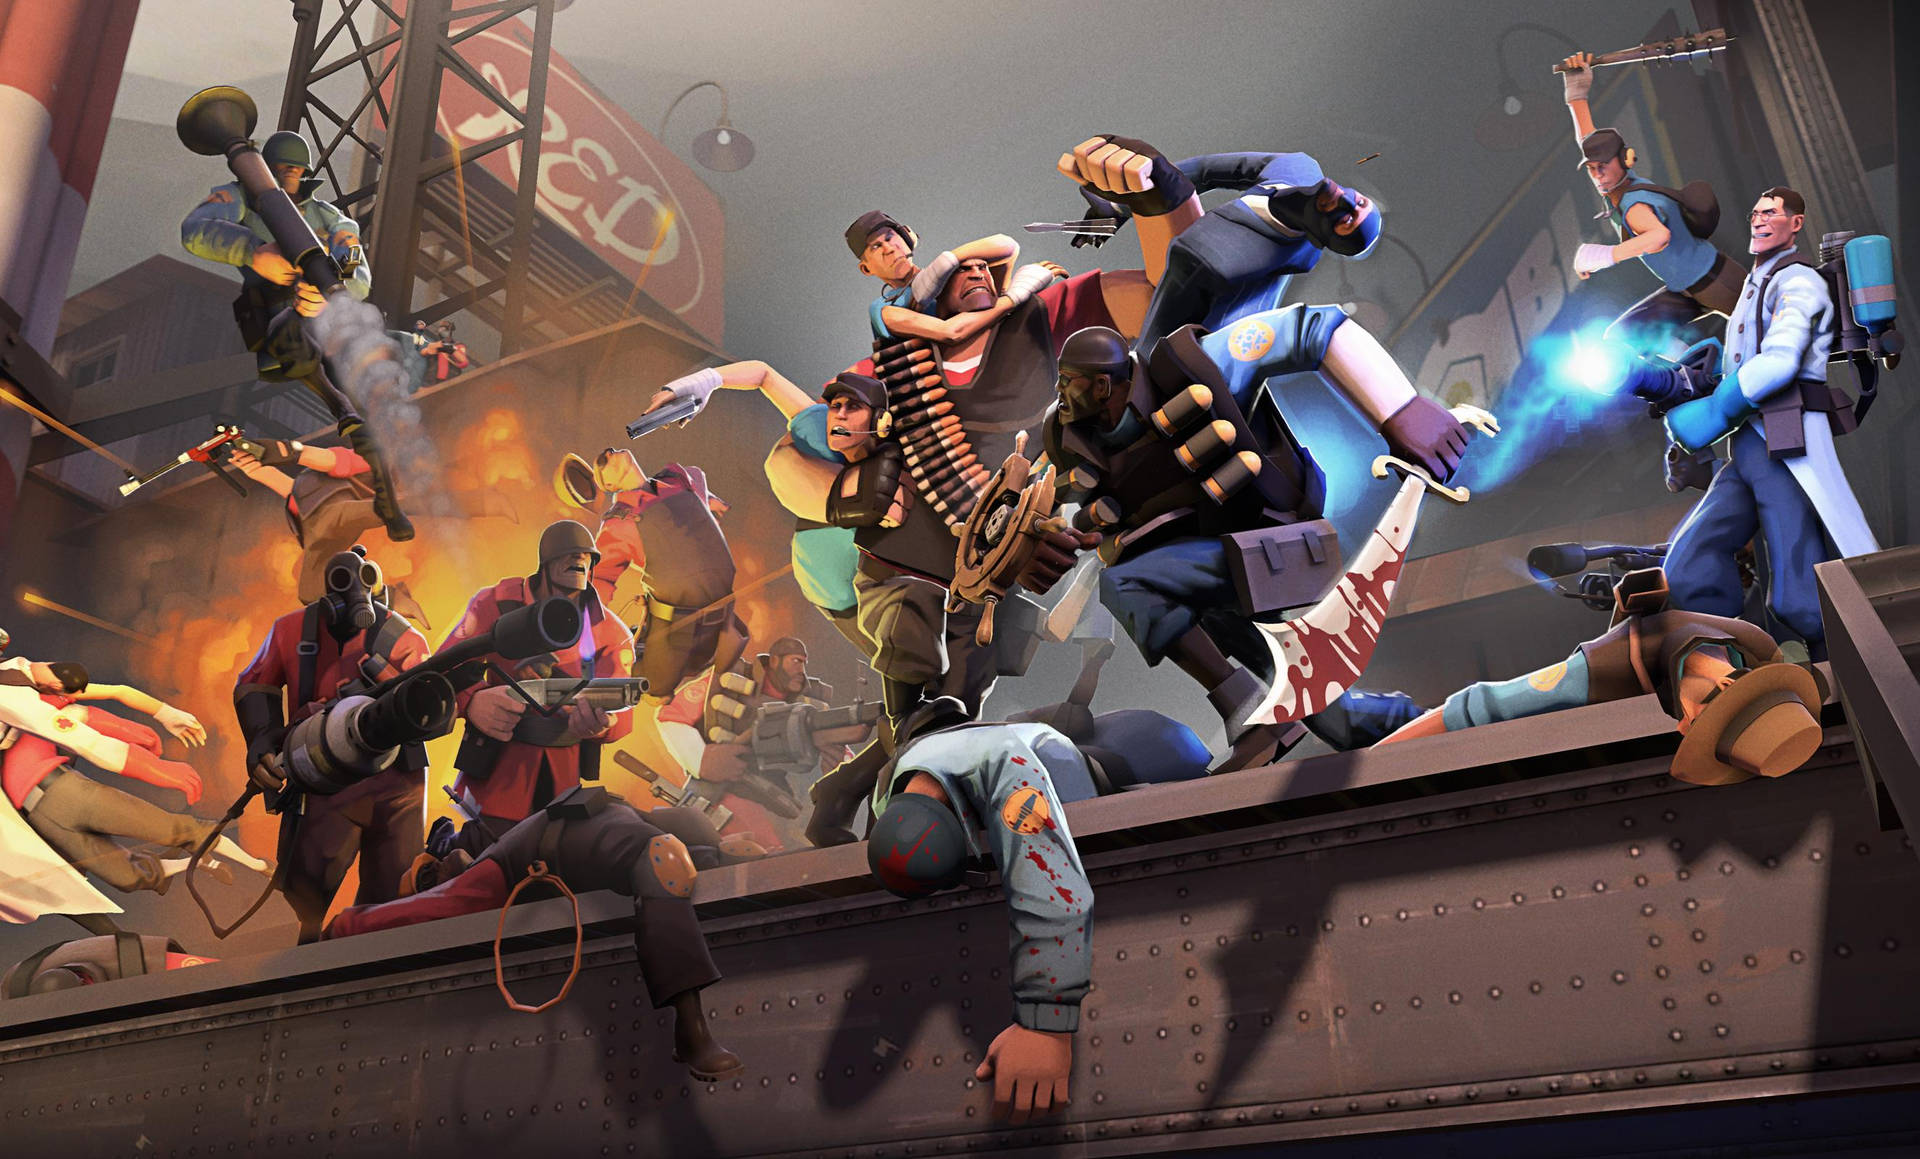 Action-Packed Game of Team Fortress 2 Wallpaper